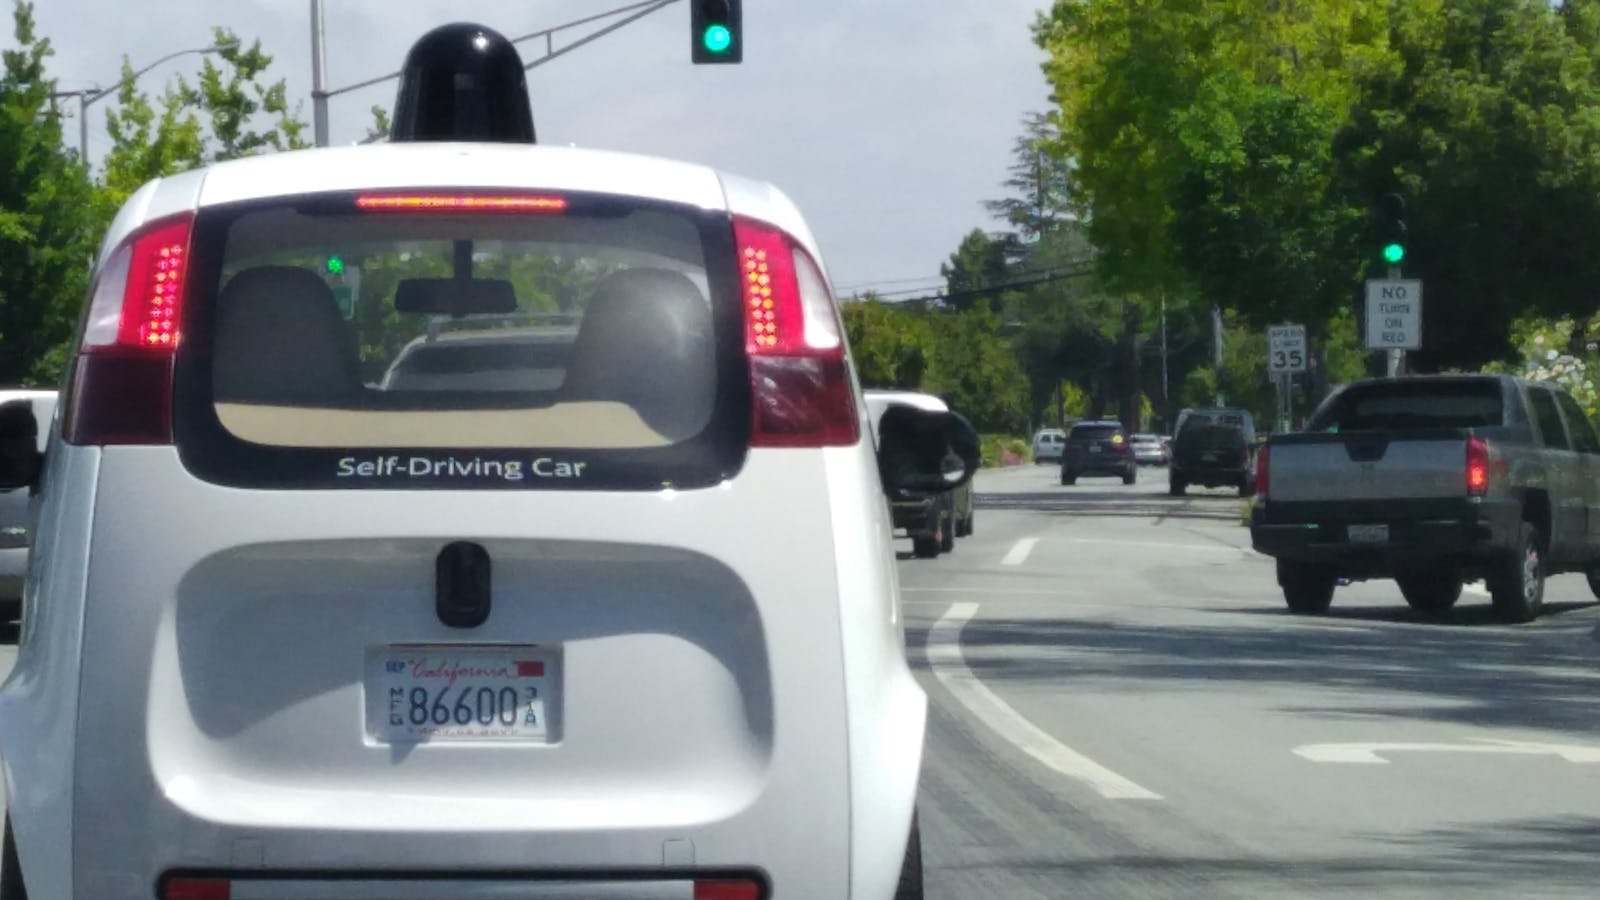 A Google self-driving car on the road in Mountain View, Calif. Photo by Amir Efrati. 